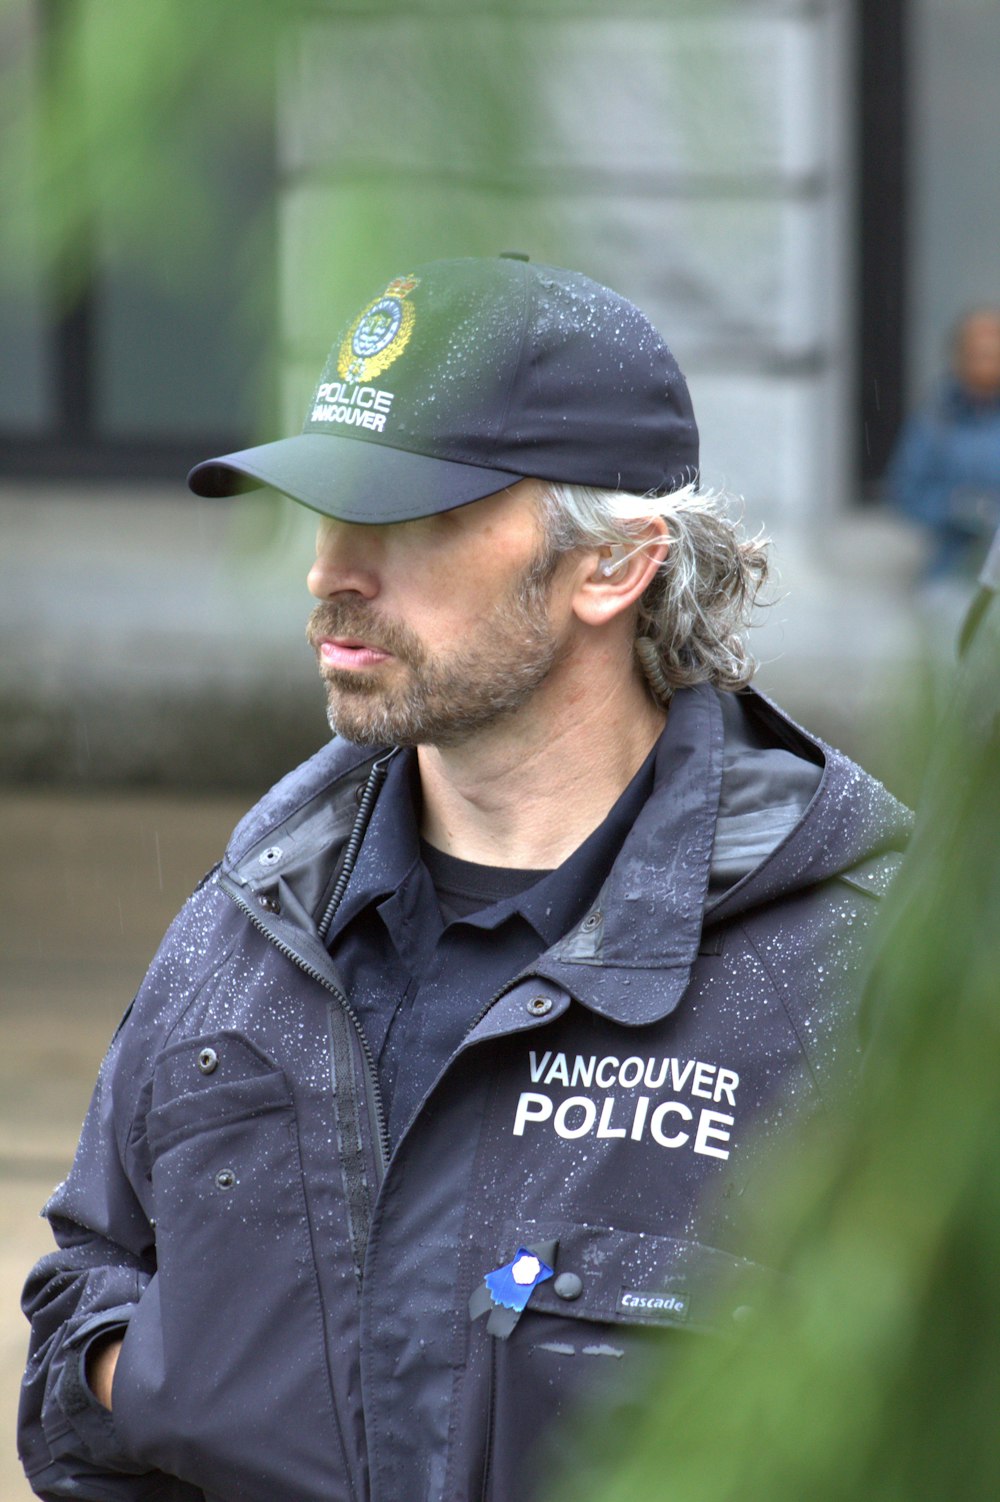 a man in a vancouver police uniform talking to someone